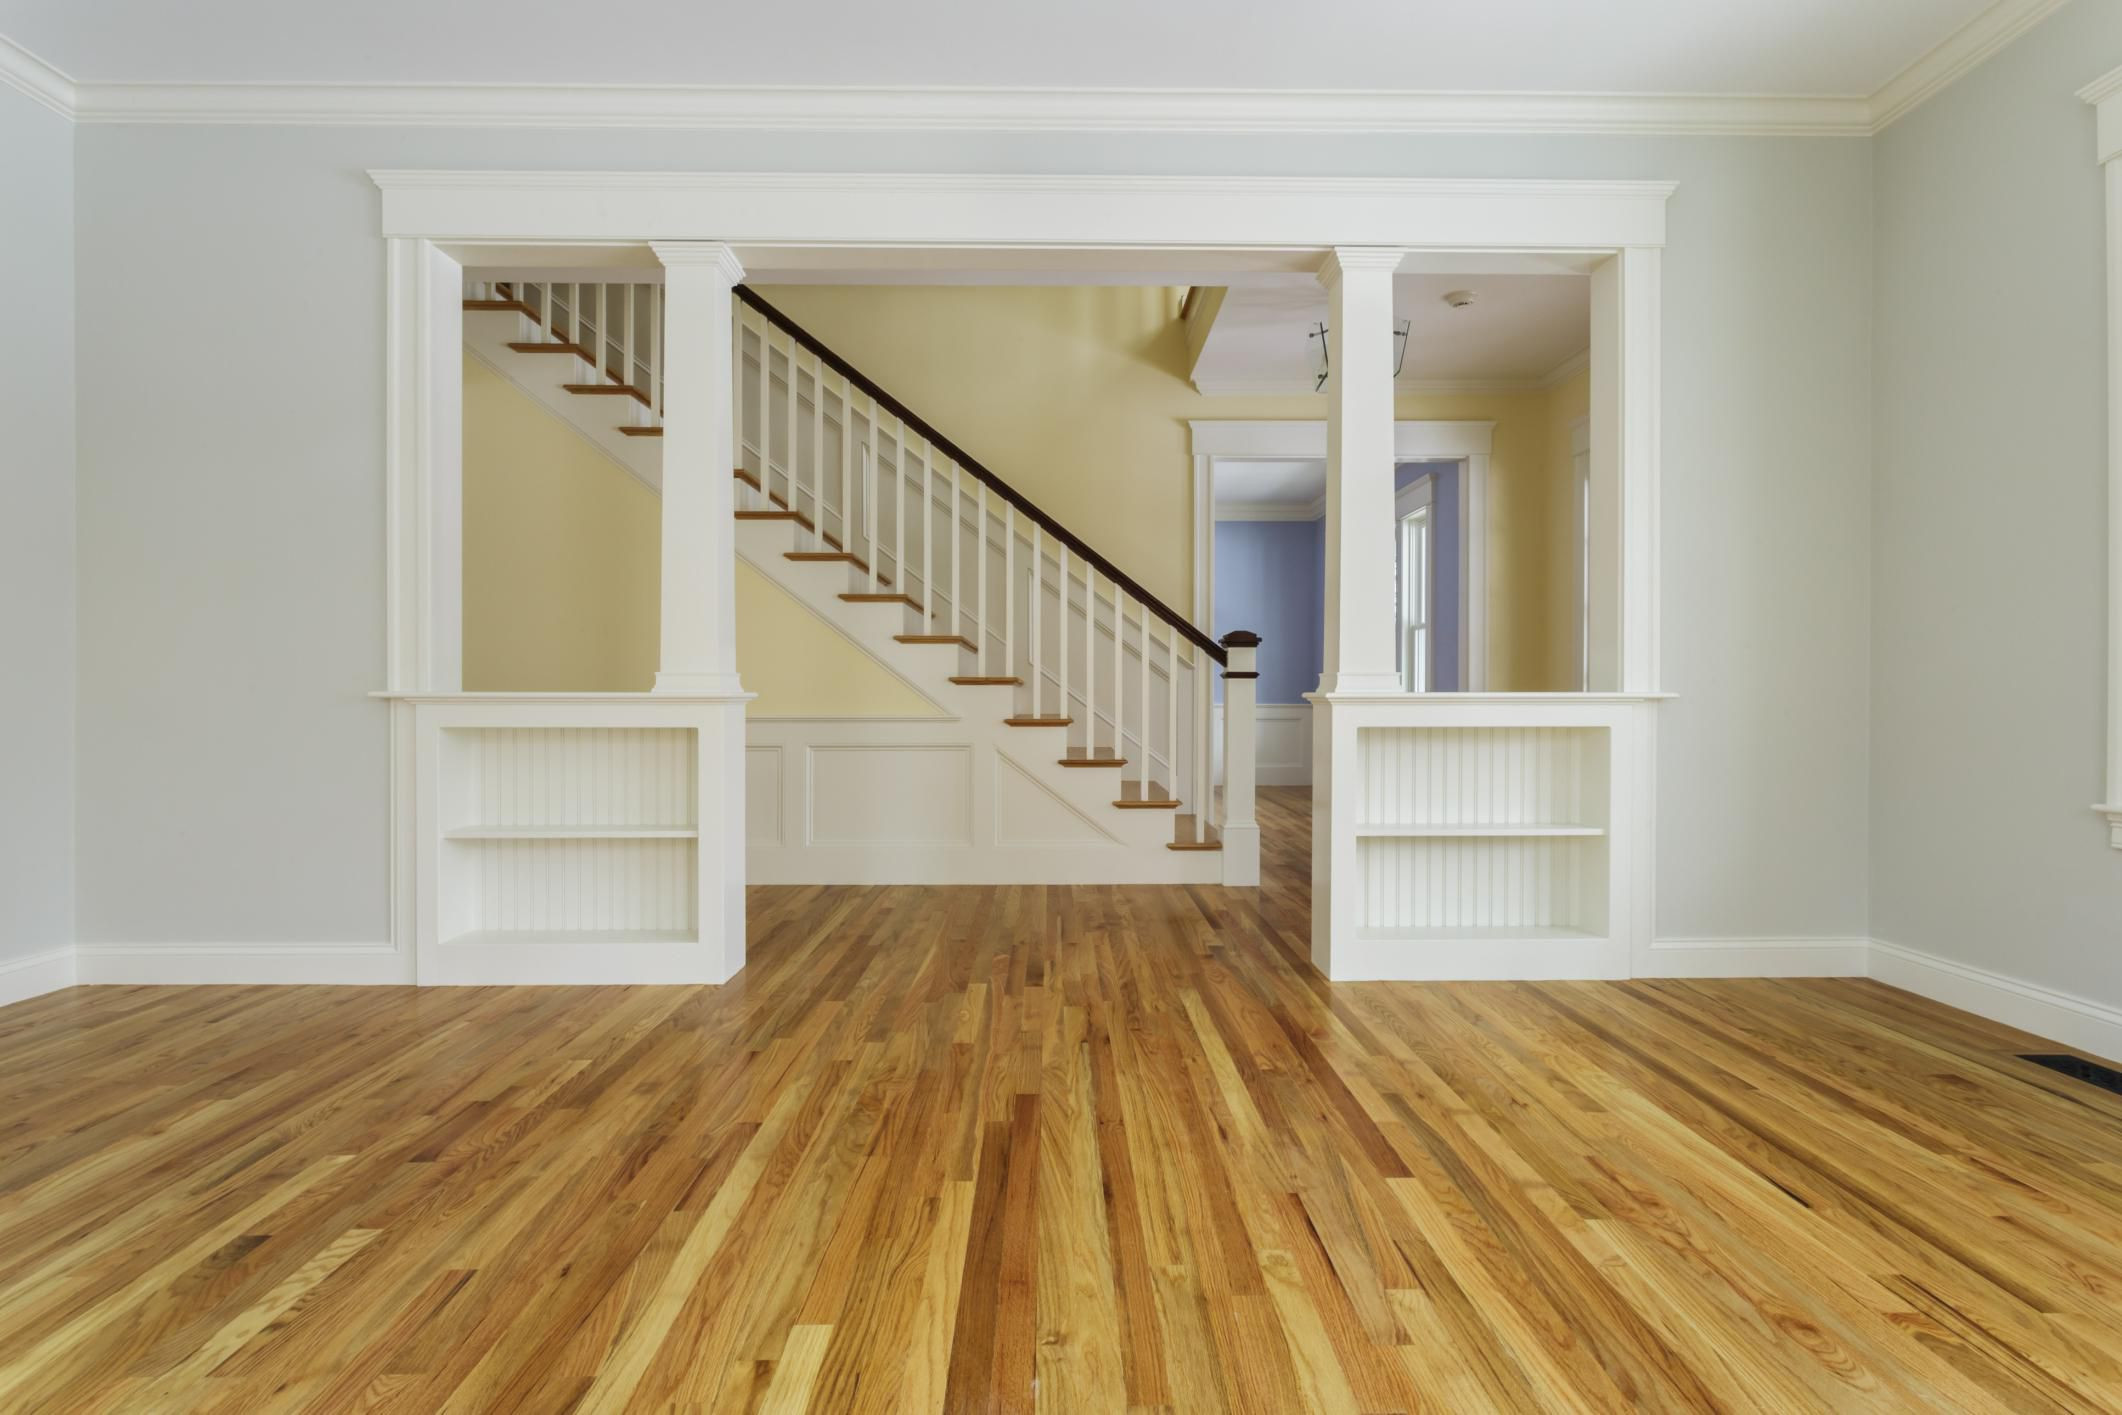 15 Awesome 3 4 Vs 1 2 Inch Engineered Hardwood Flooring 2024 free download 3 4 vs 1 2 inch engineered hardwood flooring of guide to solid hardwood floors with 168686571 56a49f213df78cf772834e24